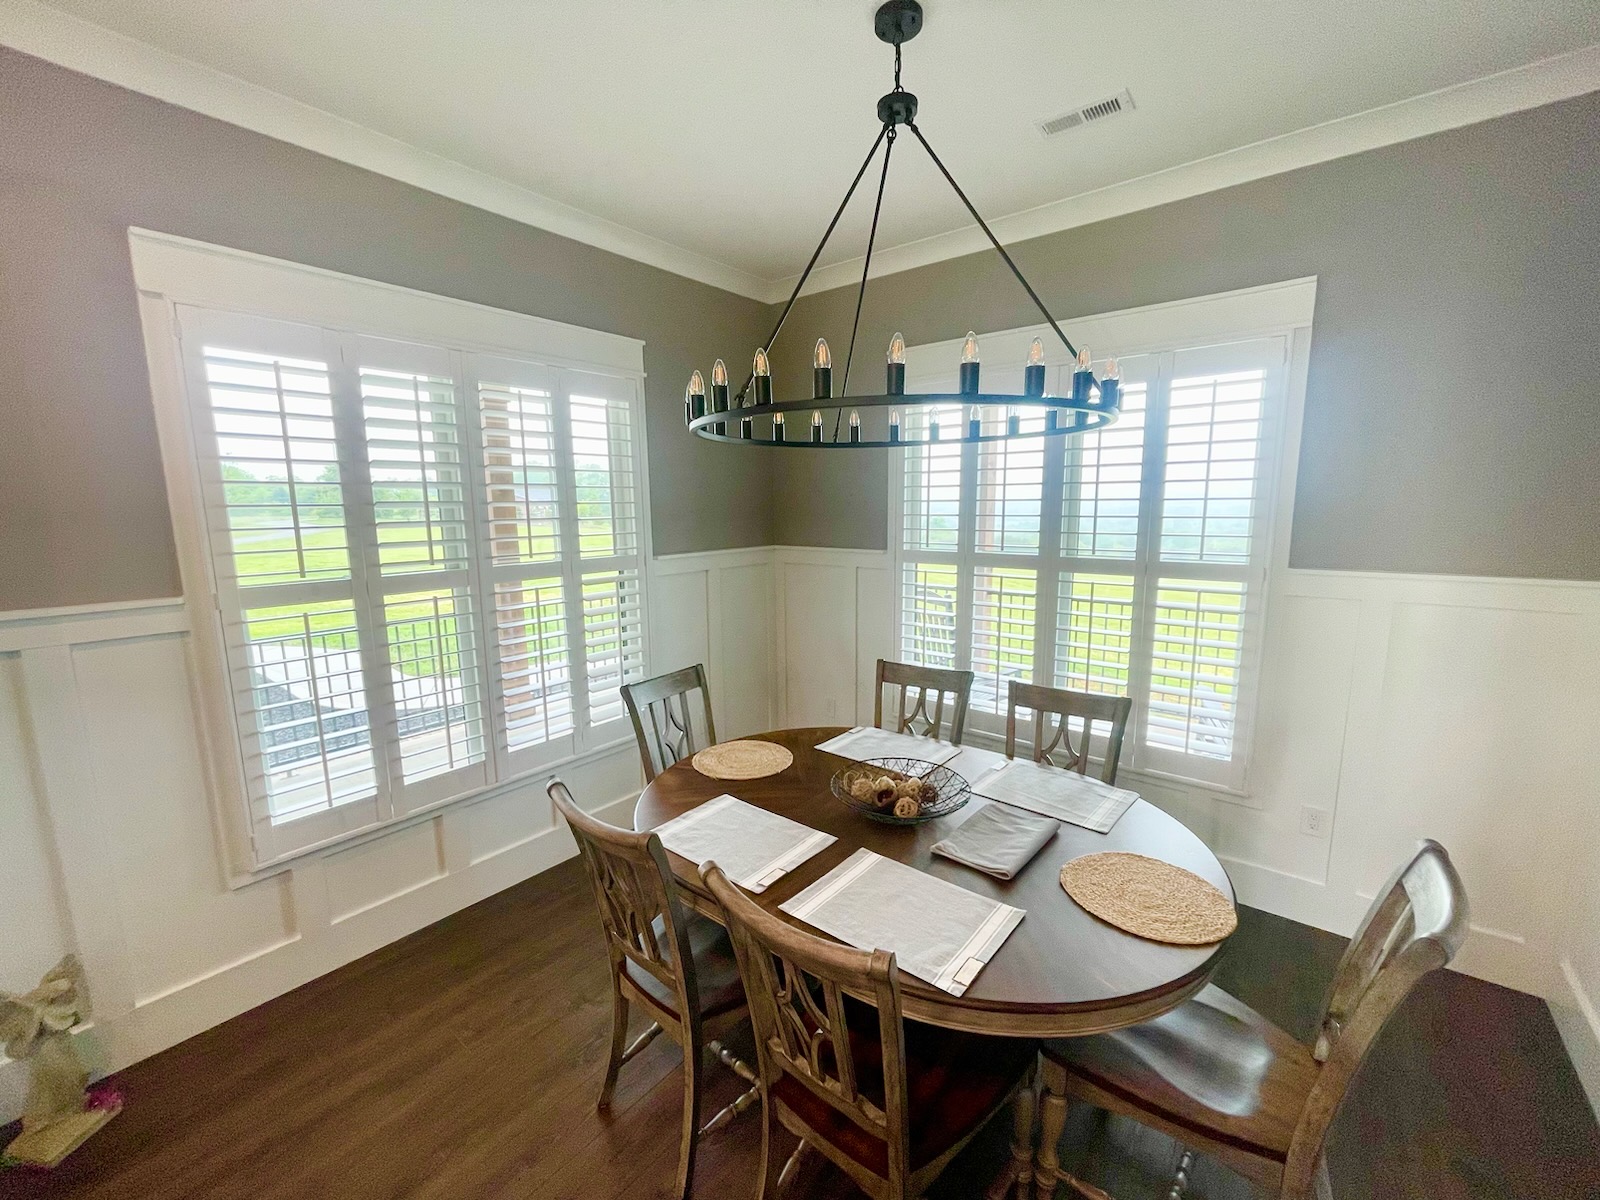 Create a bistro-style atmosphere in your dining room ahead of the holidays! We make it easy with our Budget Blinds of Knoxville & Maryville Knoxville (865)588-3377